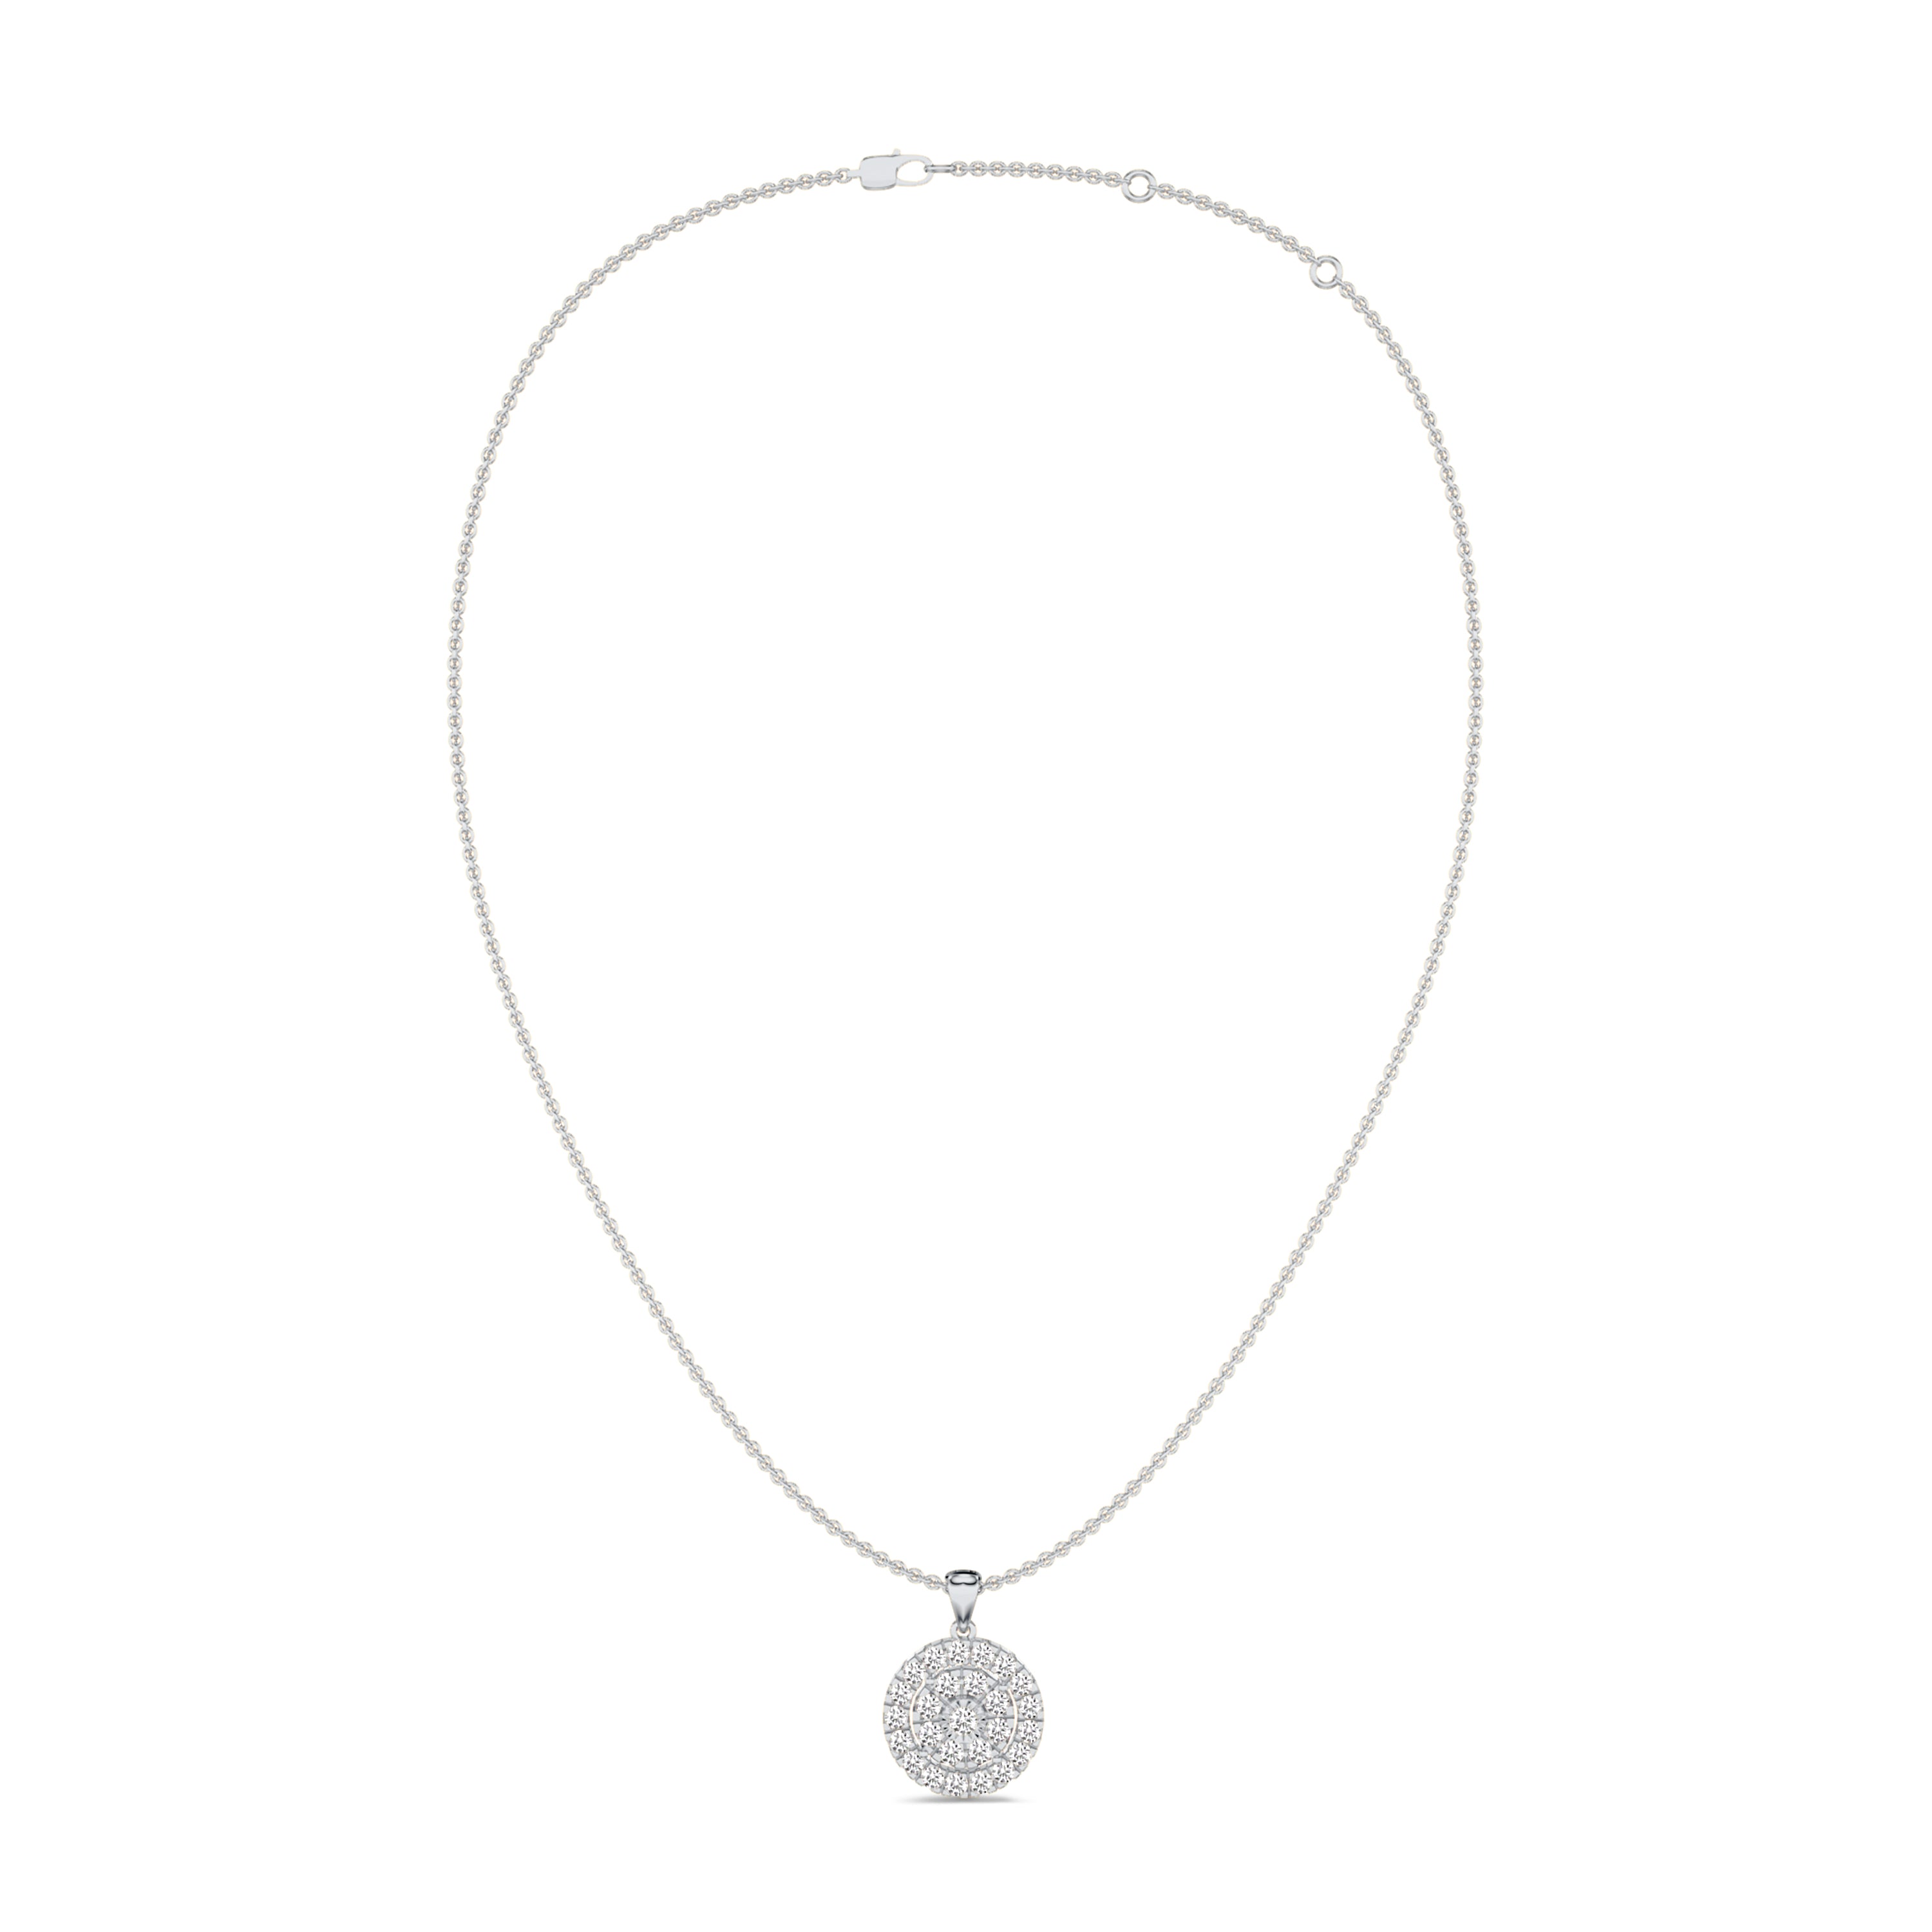 round cluster diamond necklace in 18K white gold, FG color, SI clarity, 0.32 carat